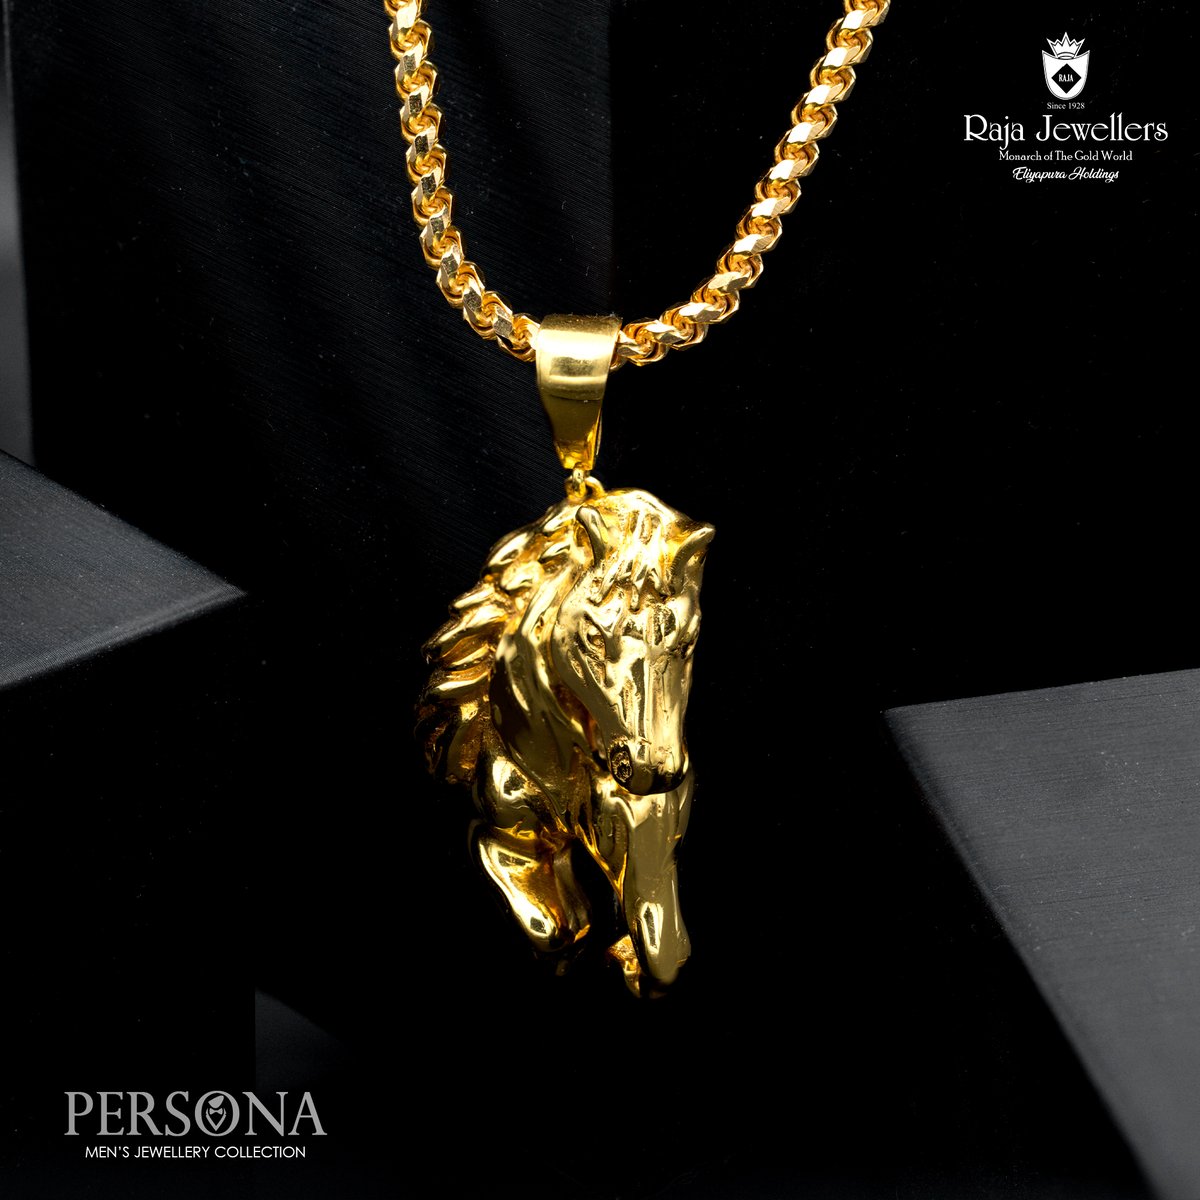 March towards your aims, let pride be your companion.
Discover the allure of the “𝐏𝐄𝐑𝐒𝐎𝐍𝐀” Men’s jewellery collection.
#Persona #Personality #RajaJewellers #mensjewellery #positivevibes #lka #jewelleryforhim #ceylonshoutout
Raja Jewellers - By Eliyapura Holdings.
Web: -